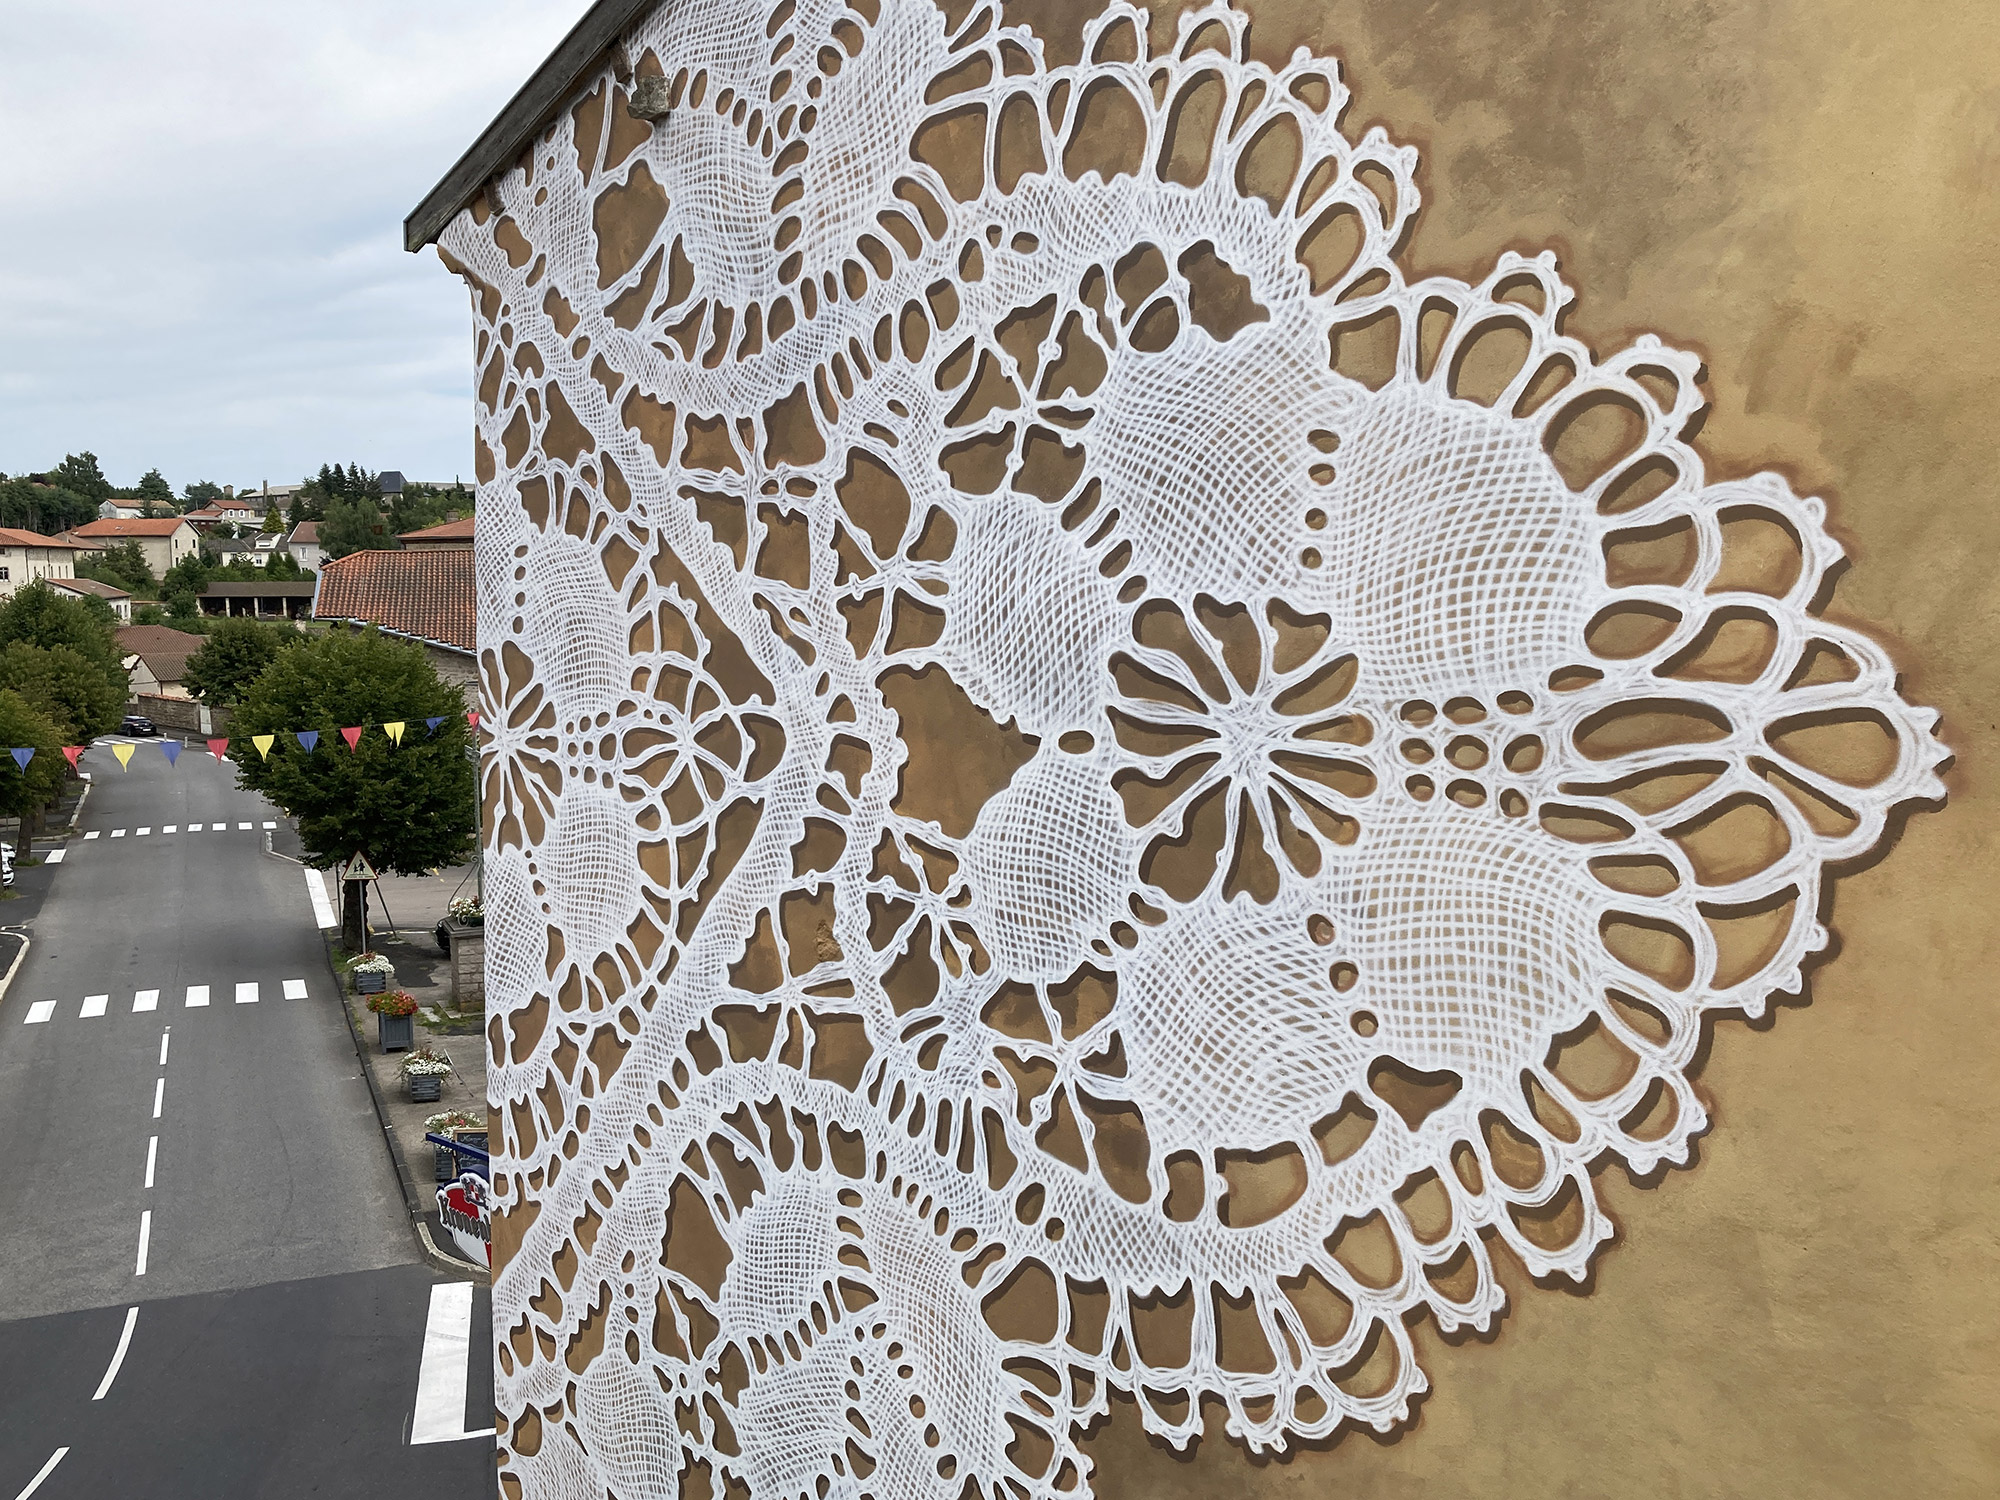 Ornate Murals by Nespoon Cloak Blank Facades in Traditional Lace Patterns –  香港美術設計協會